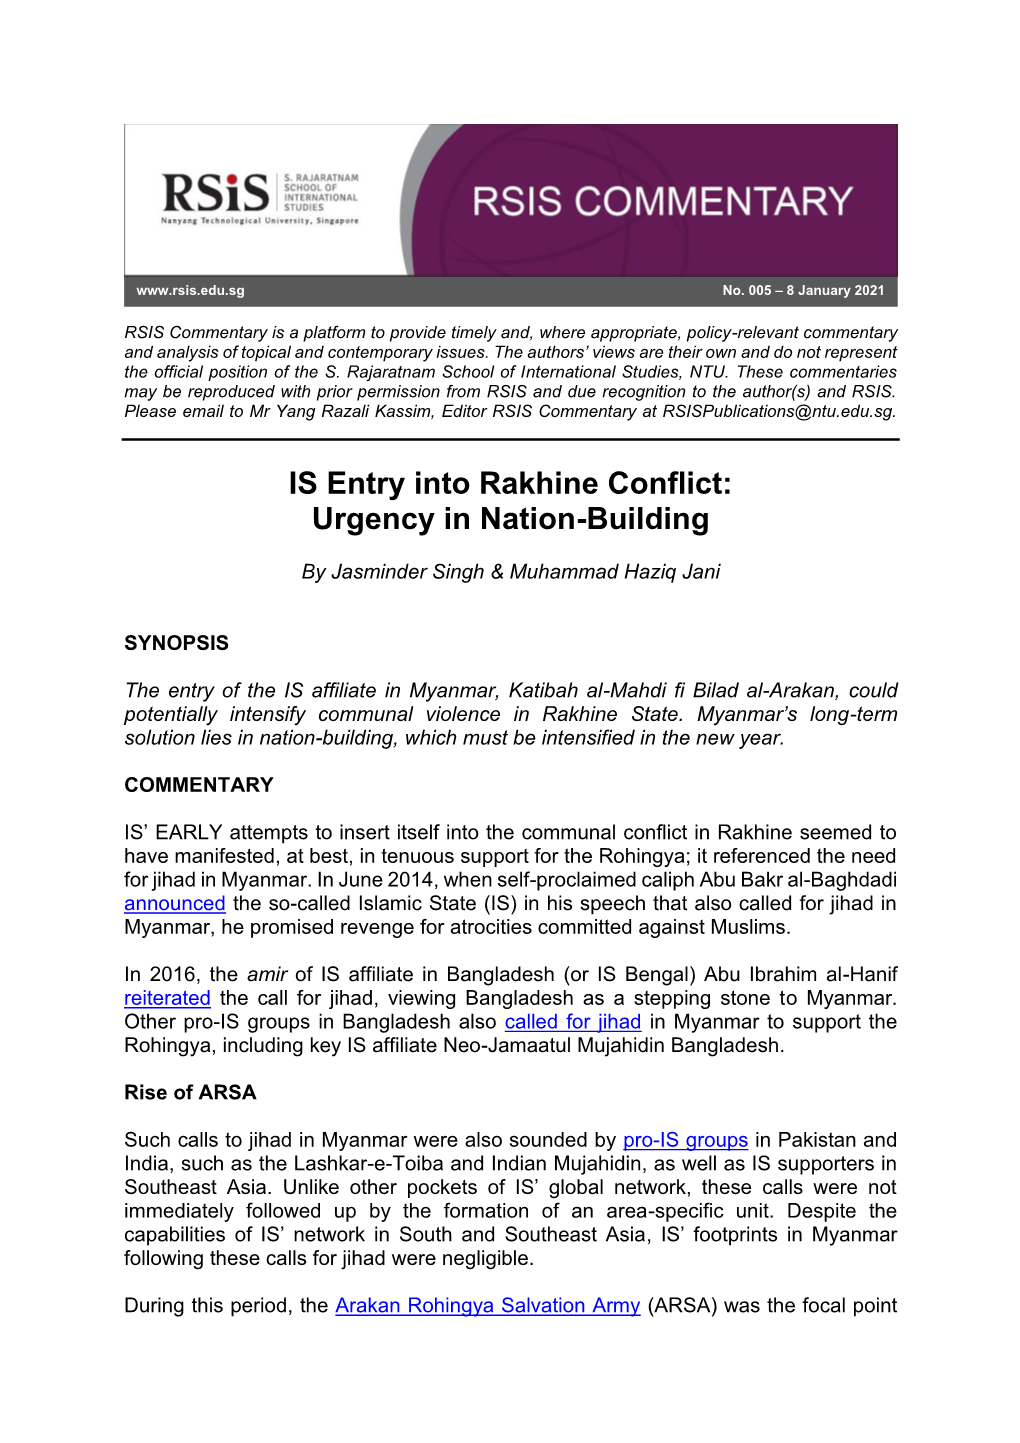 IS Entry Into Rakhine Conflict: Urgency in Nation-Building